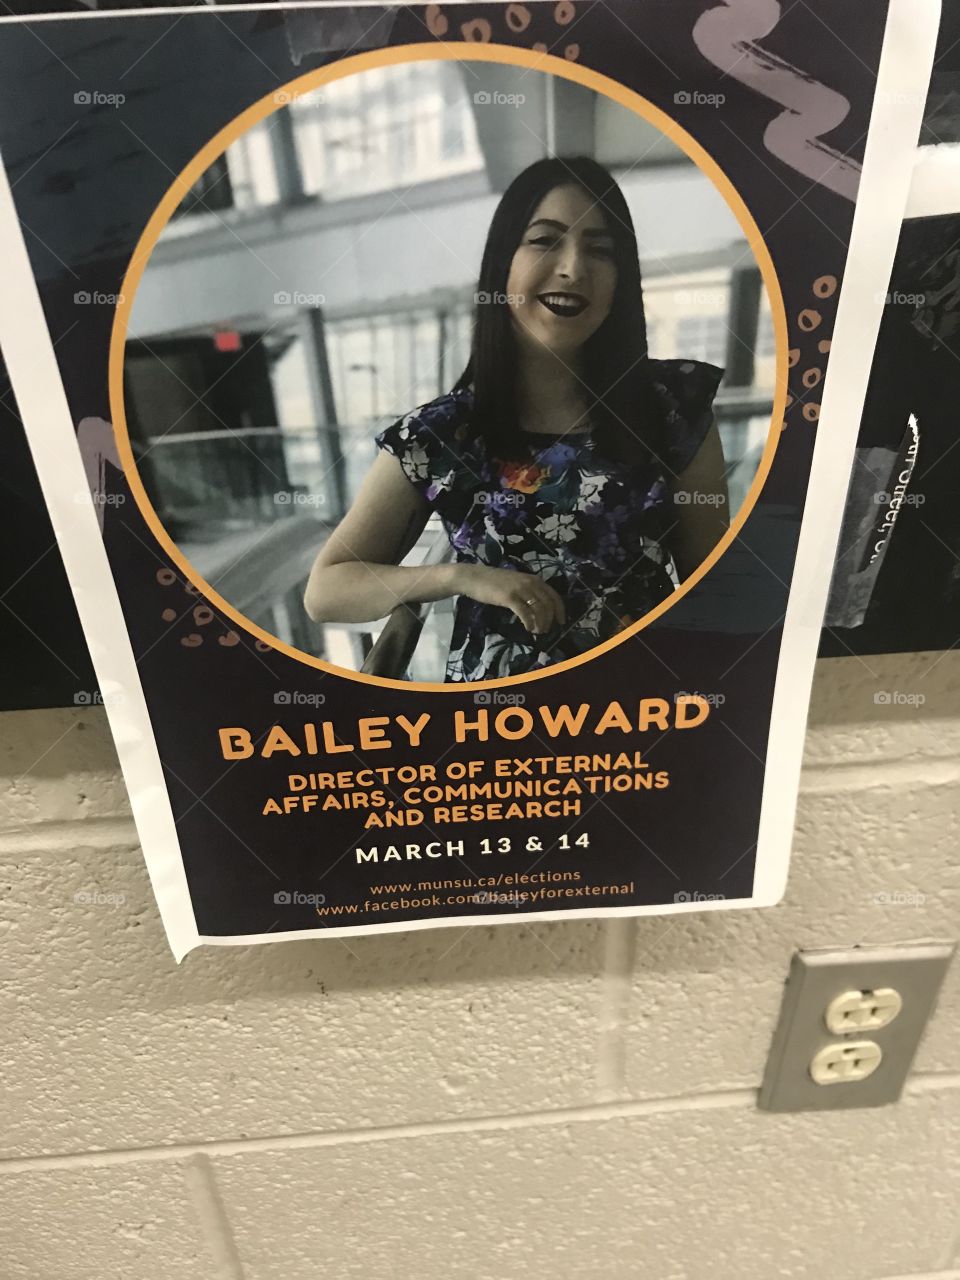 Yet another student union poster found on the MUN St. John’s campus during the annual student union elections. Every candidate has to list their 1) name 2) position they are a candidate for 3) voting days and 4) link to the MUNSU website URL for vote